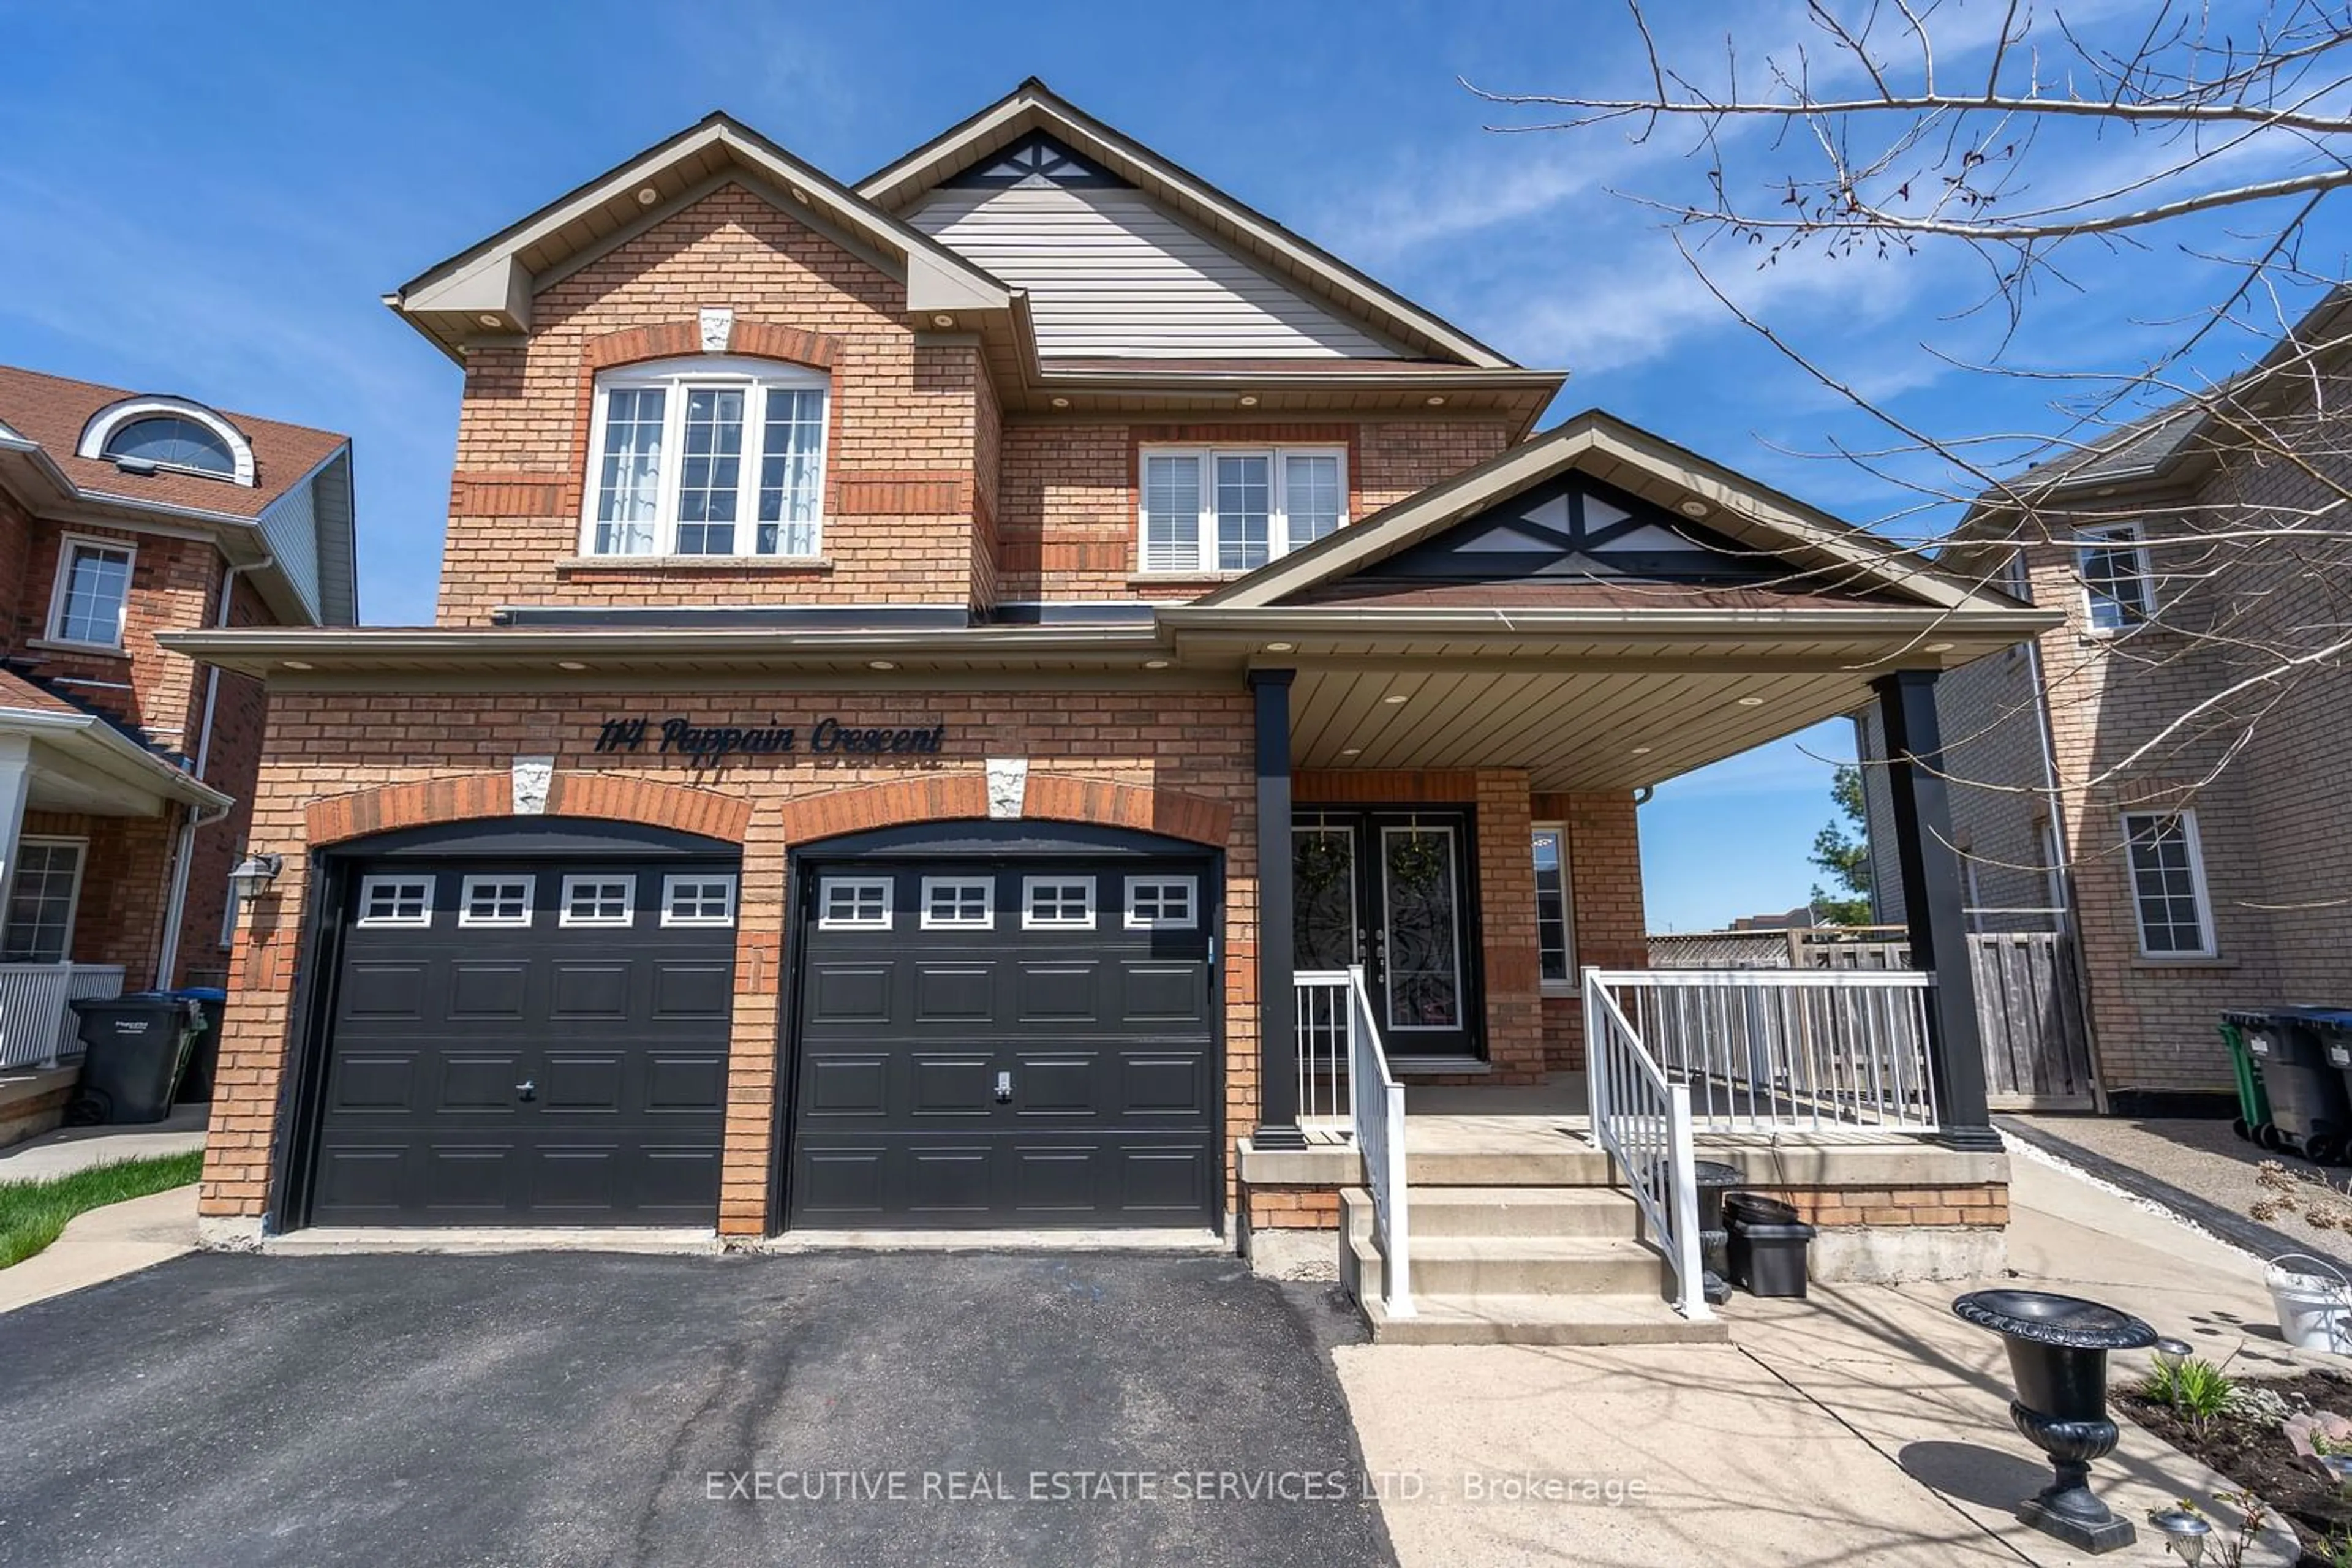 Home with brick exterior material for 114 Pappain Cres, Brampton Ontario L7A 3J7